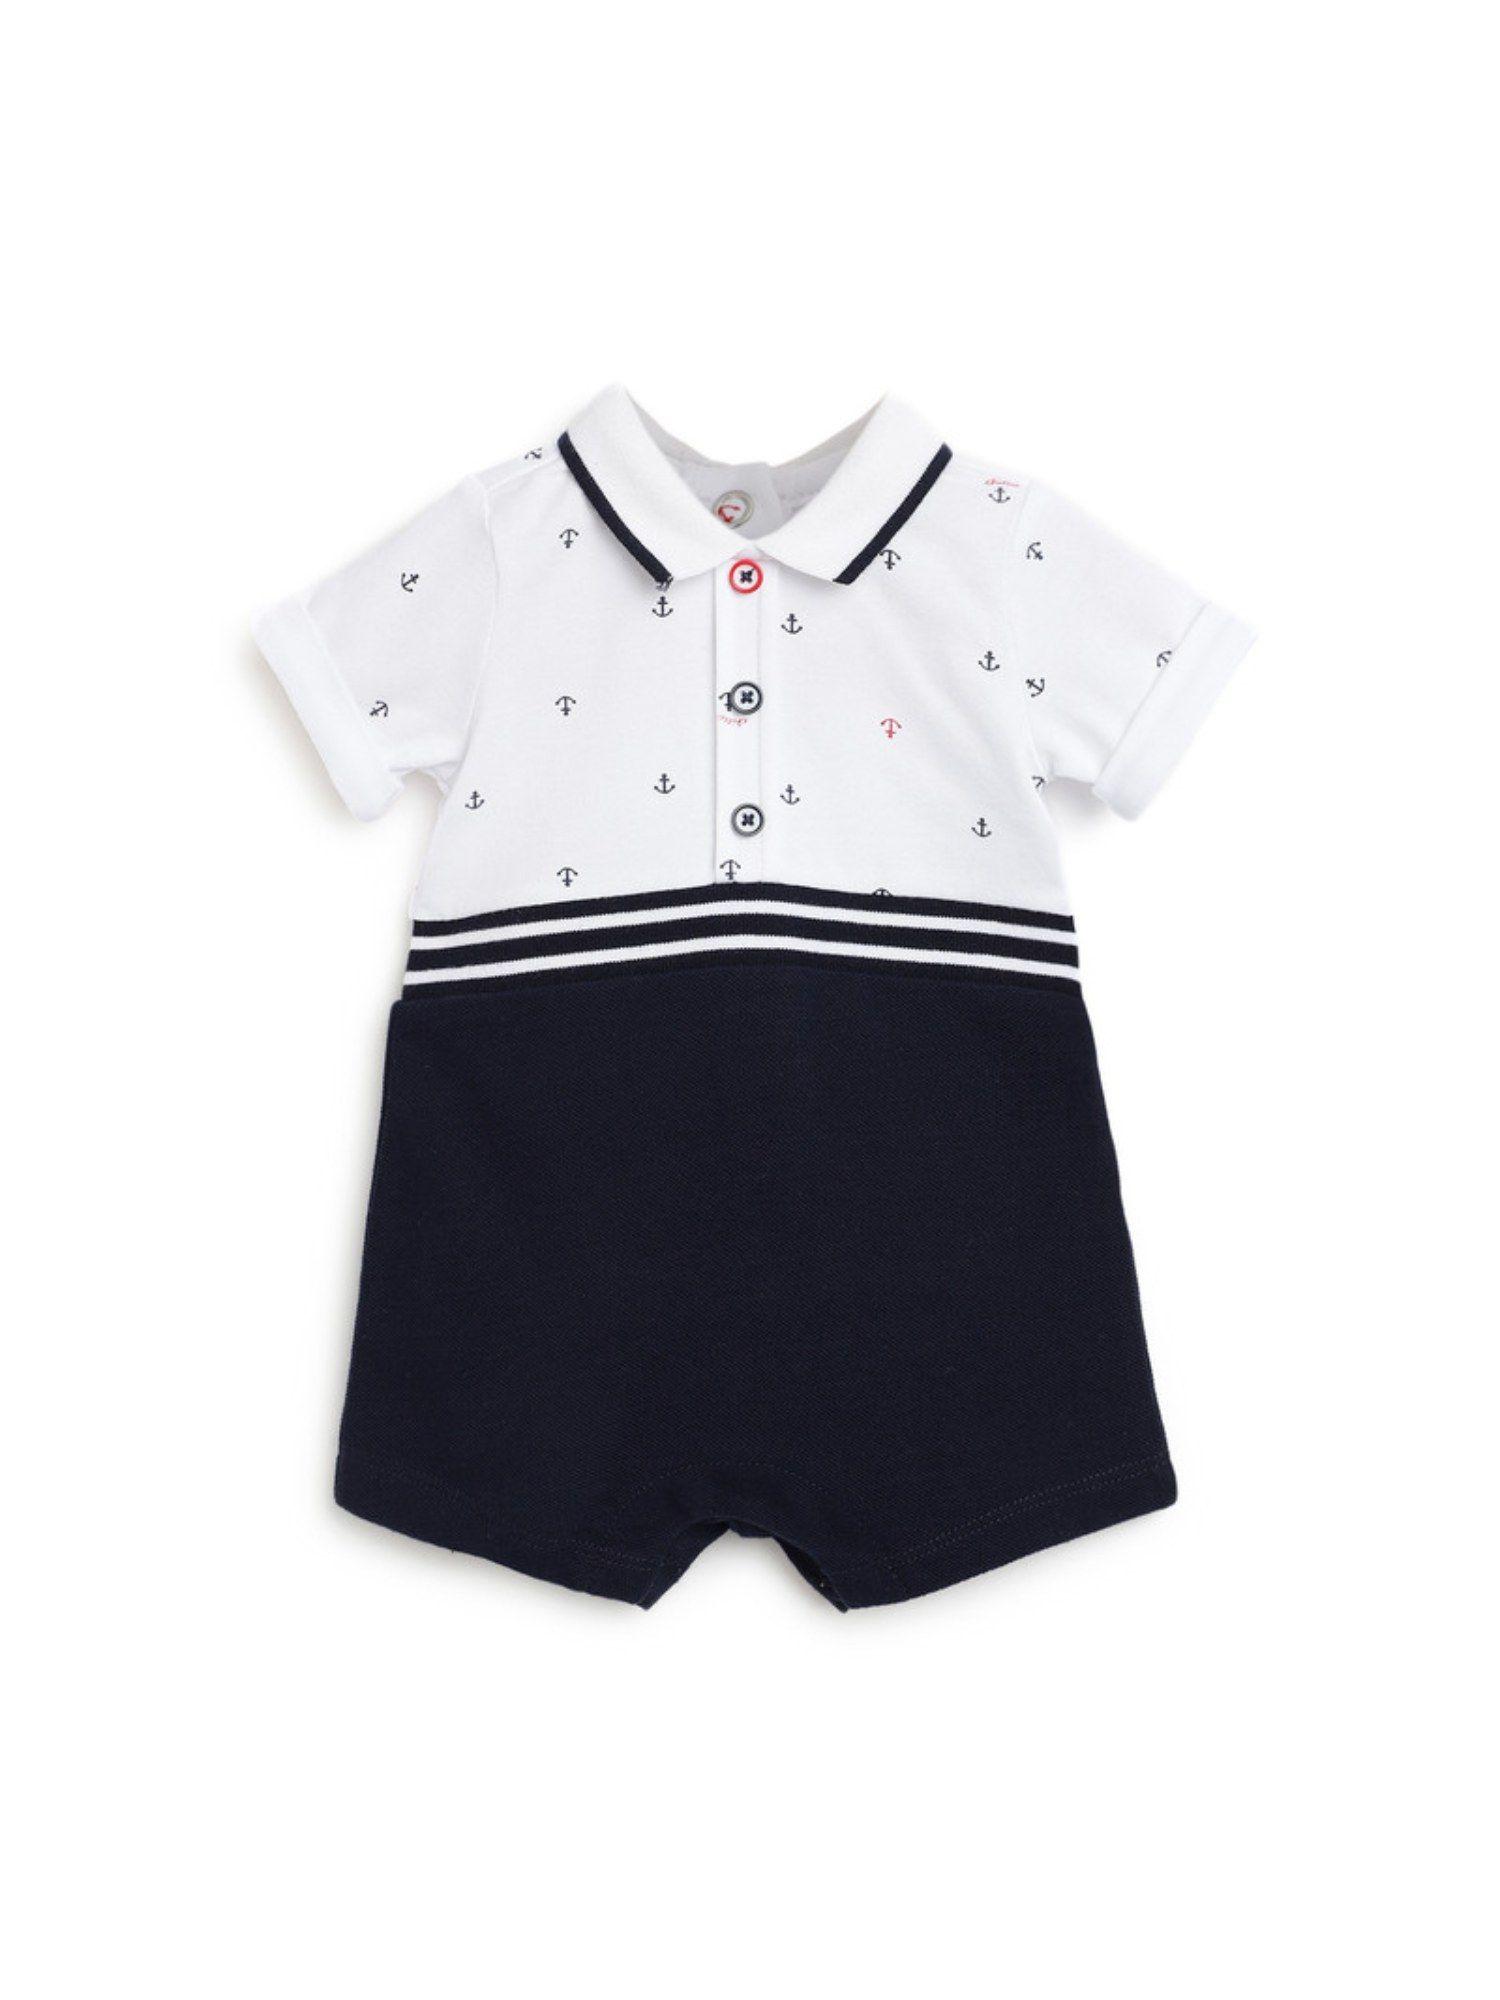 boys white & blue printed knitted romper